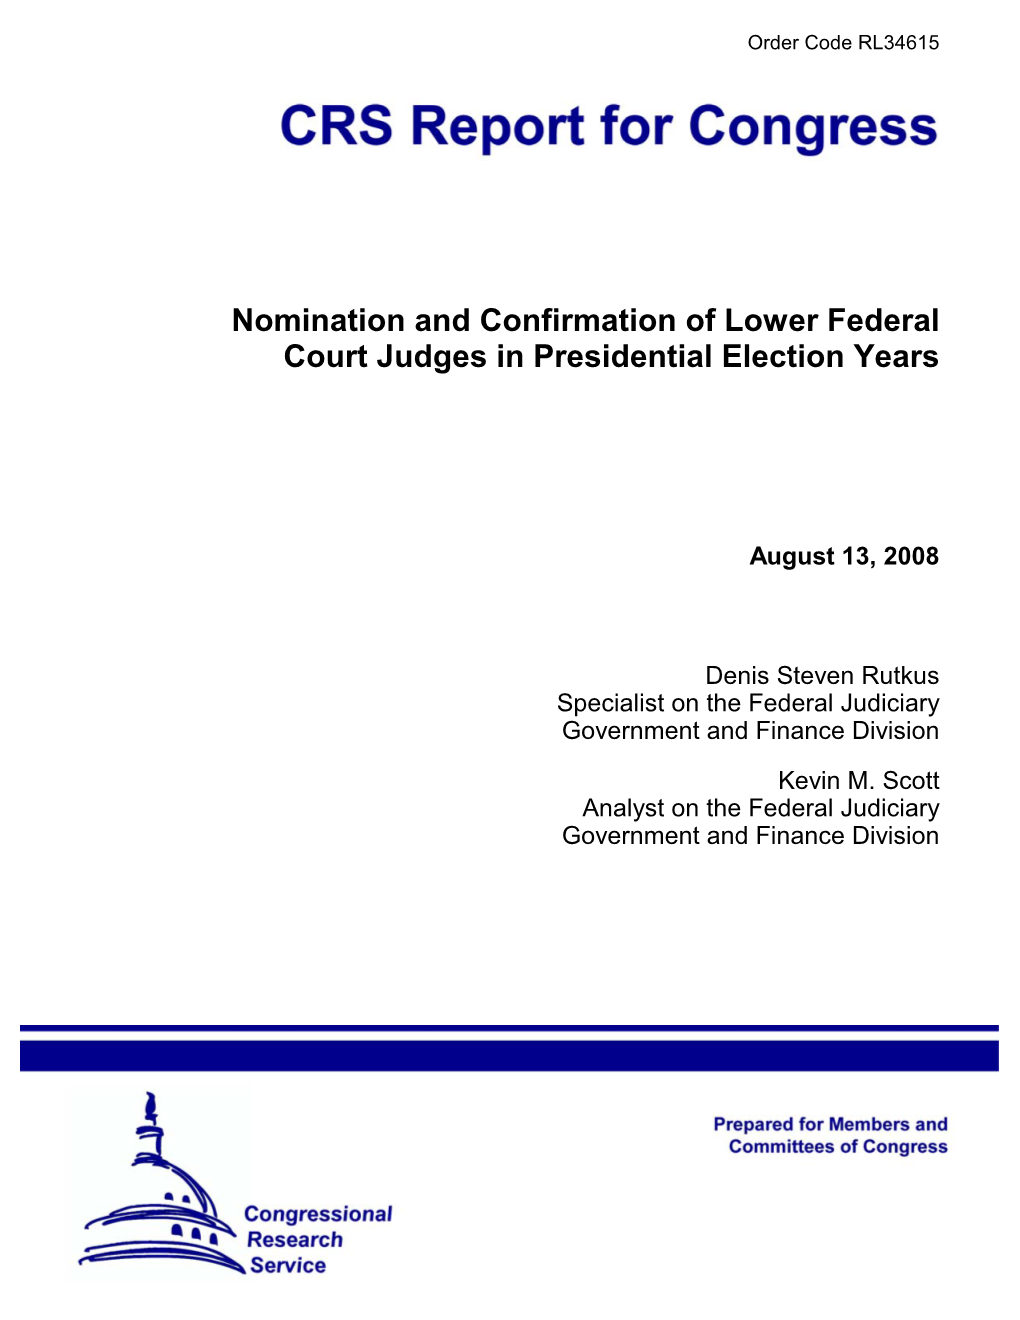 Nomination and Confirmation of Lower Federal Court Judges in Presidential Election Years